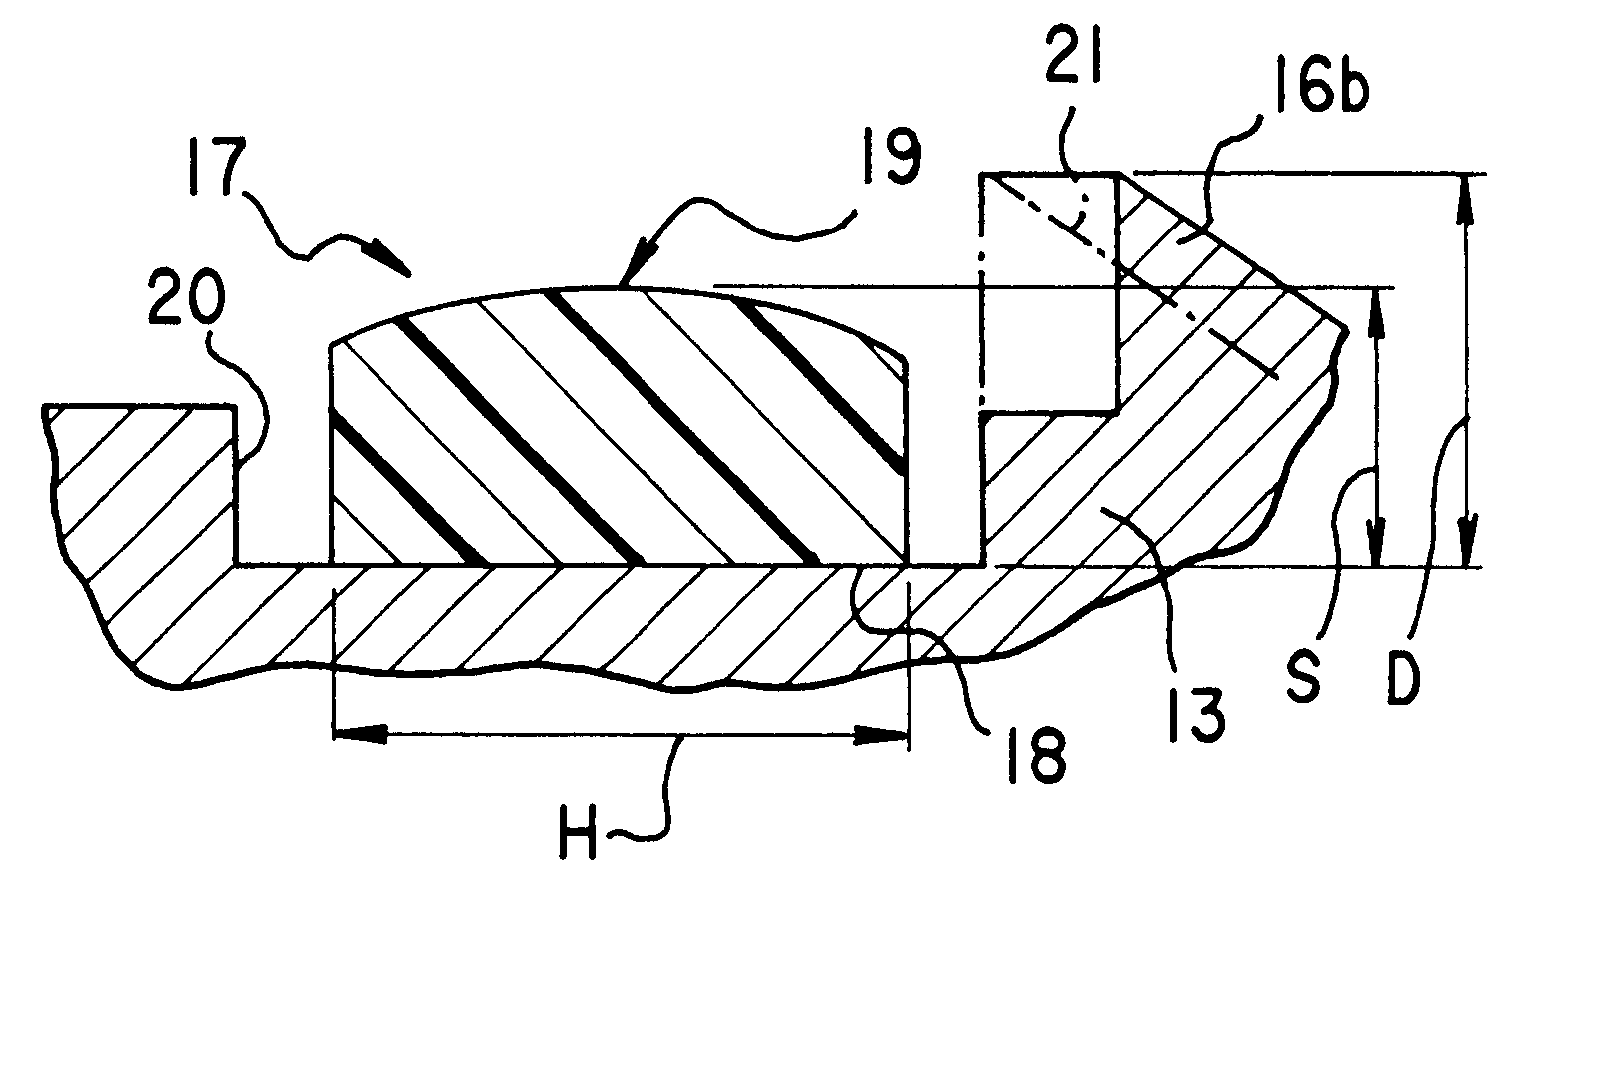 Connector for flexible pipes having at least one resilient sealing ring